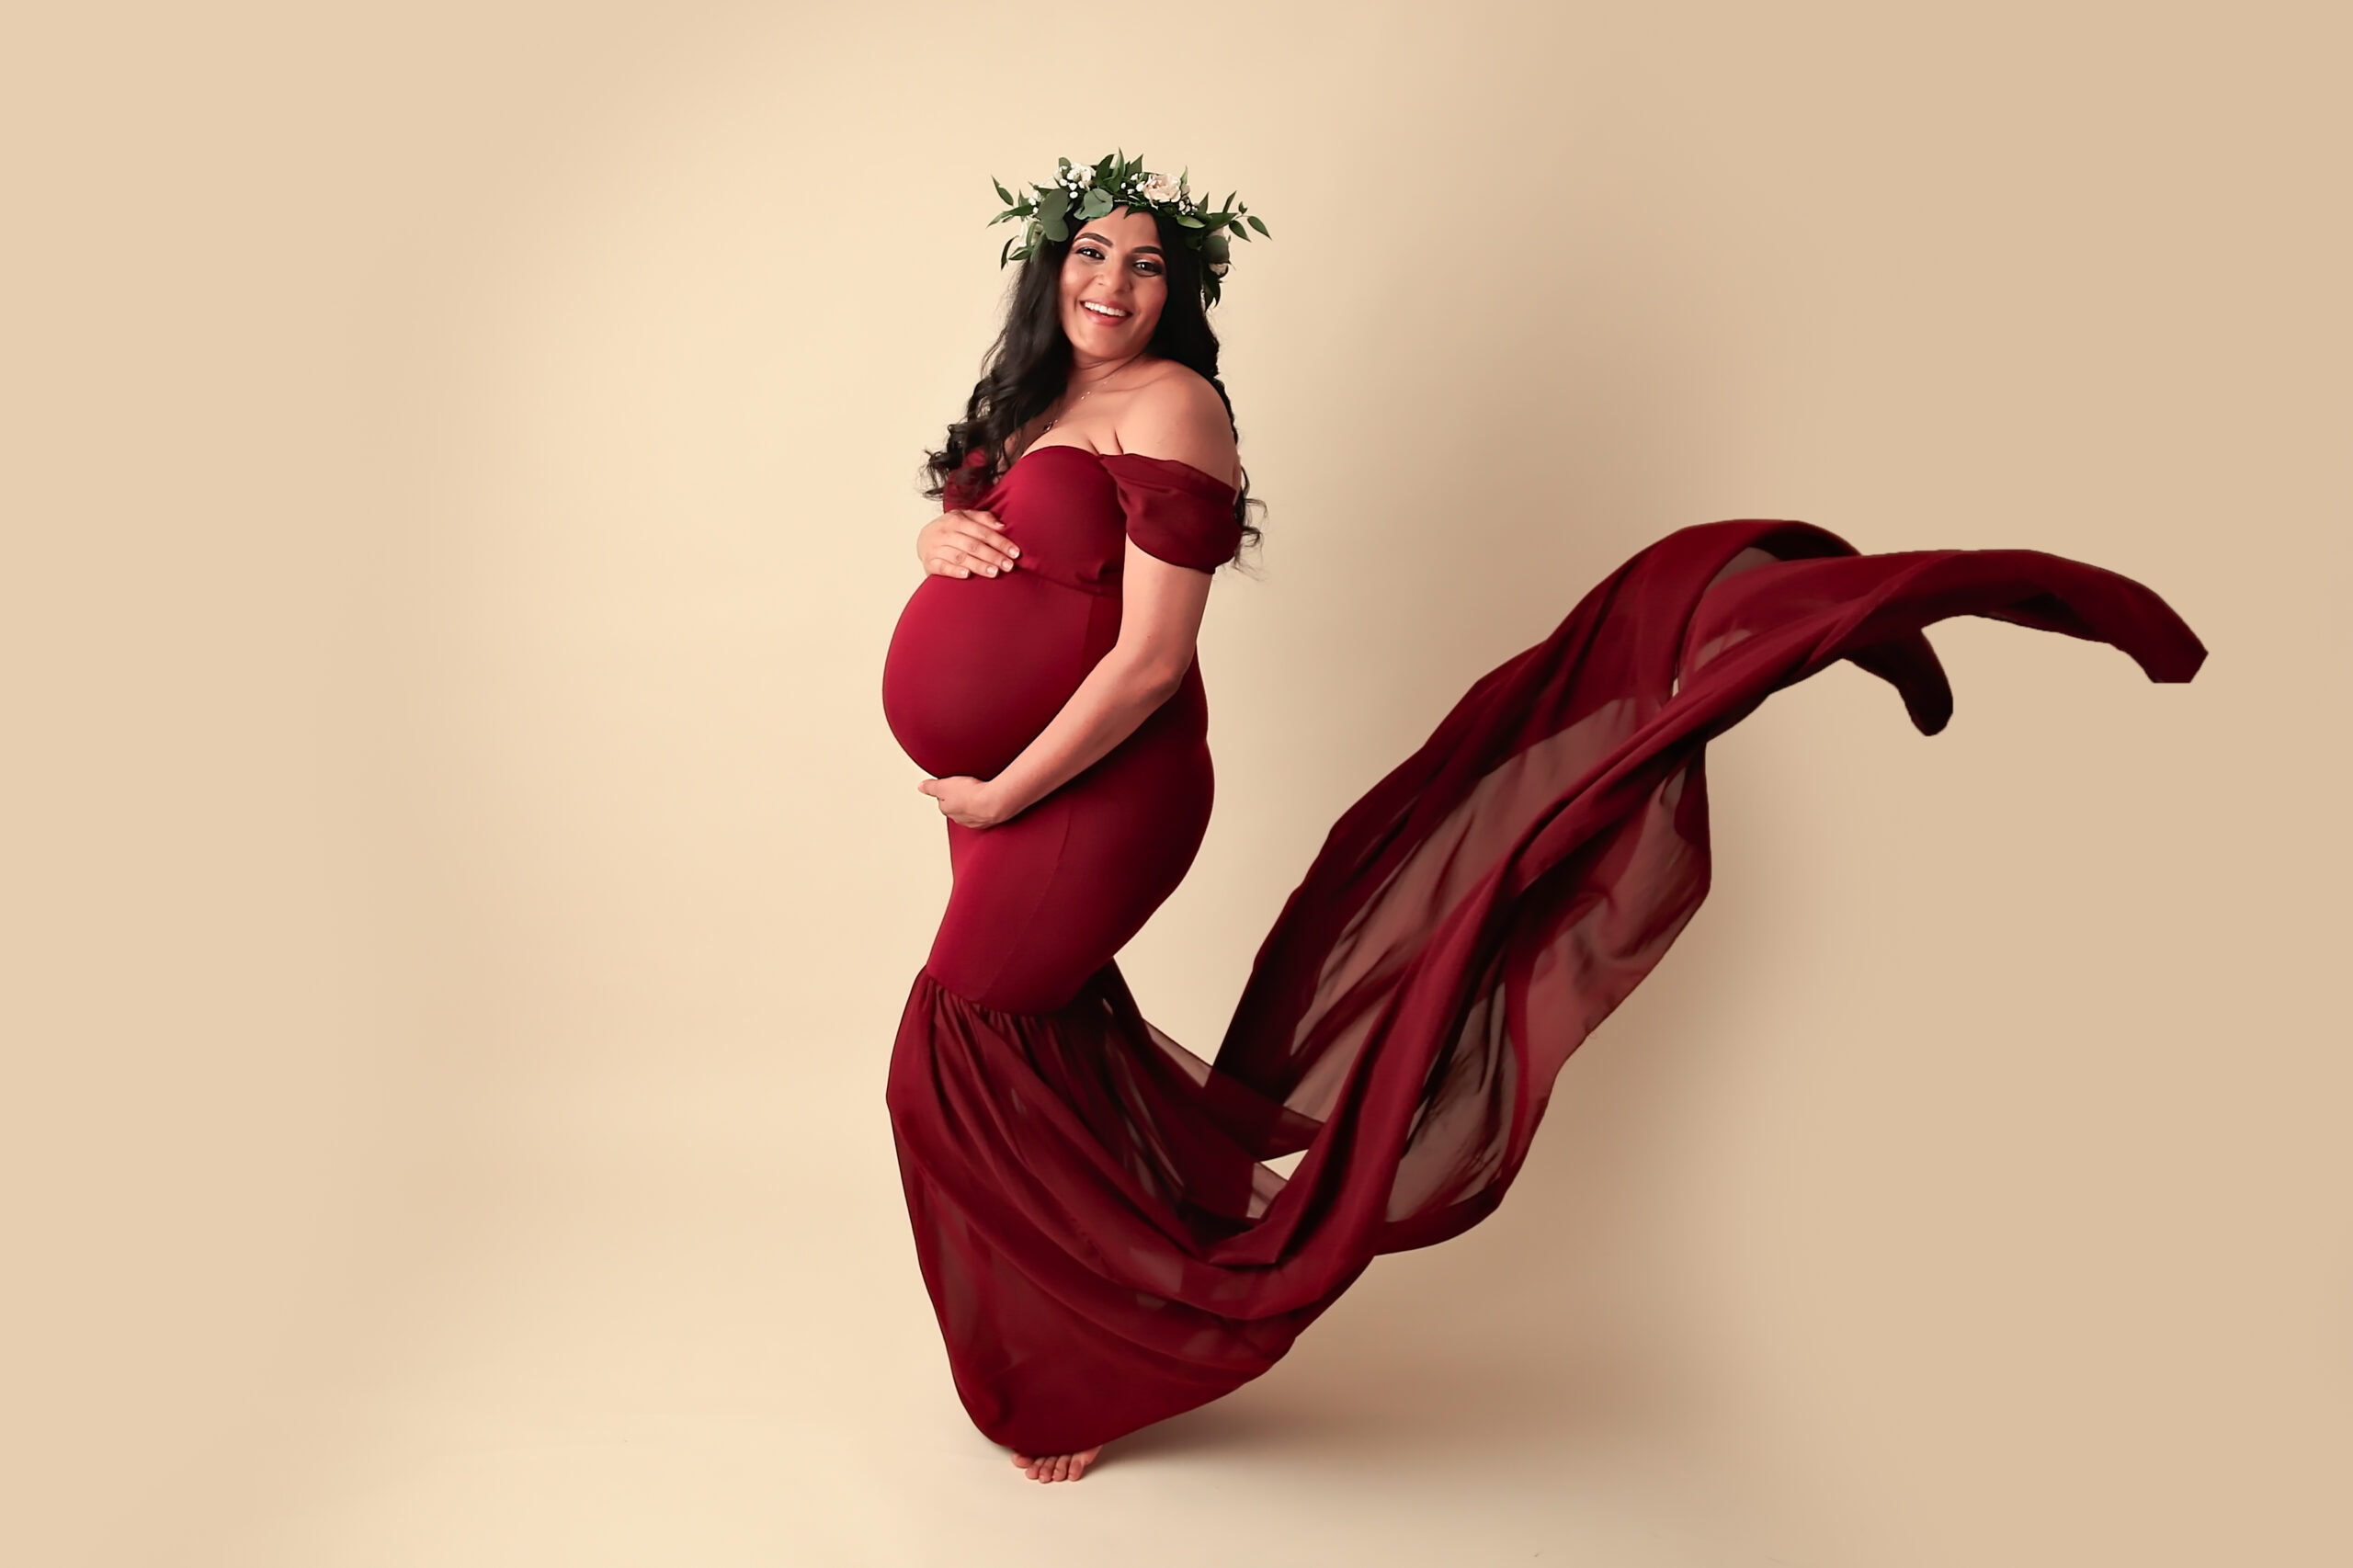 Pregnant woman with floral crown on head wearing a red maternity gown with a train flying up in the air